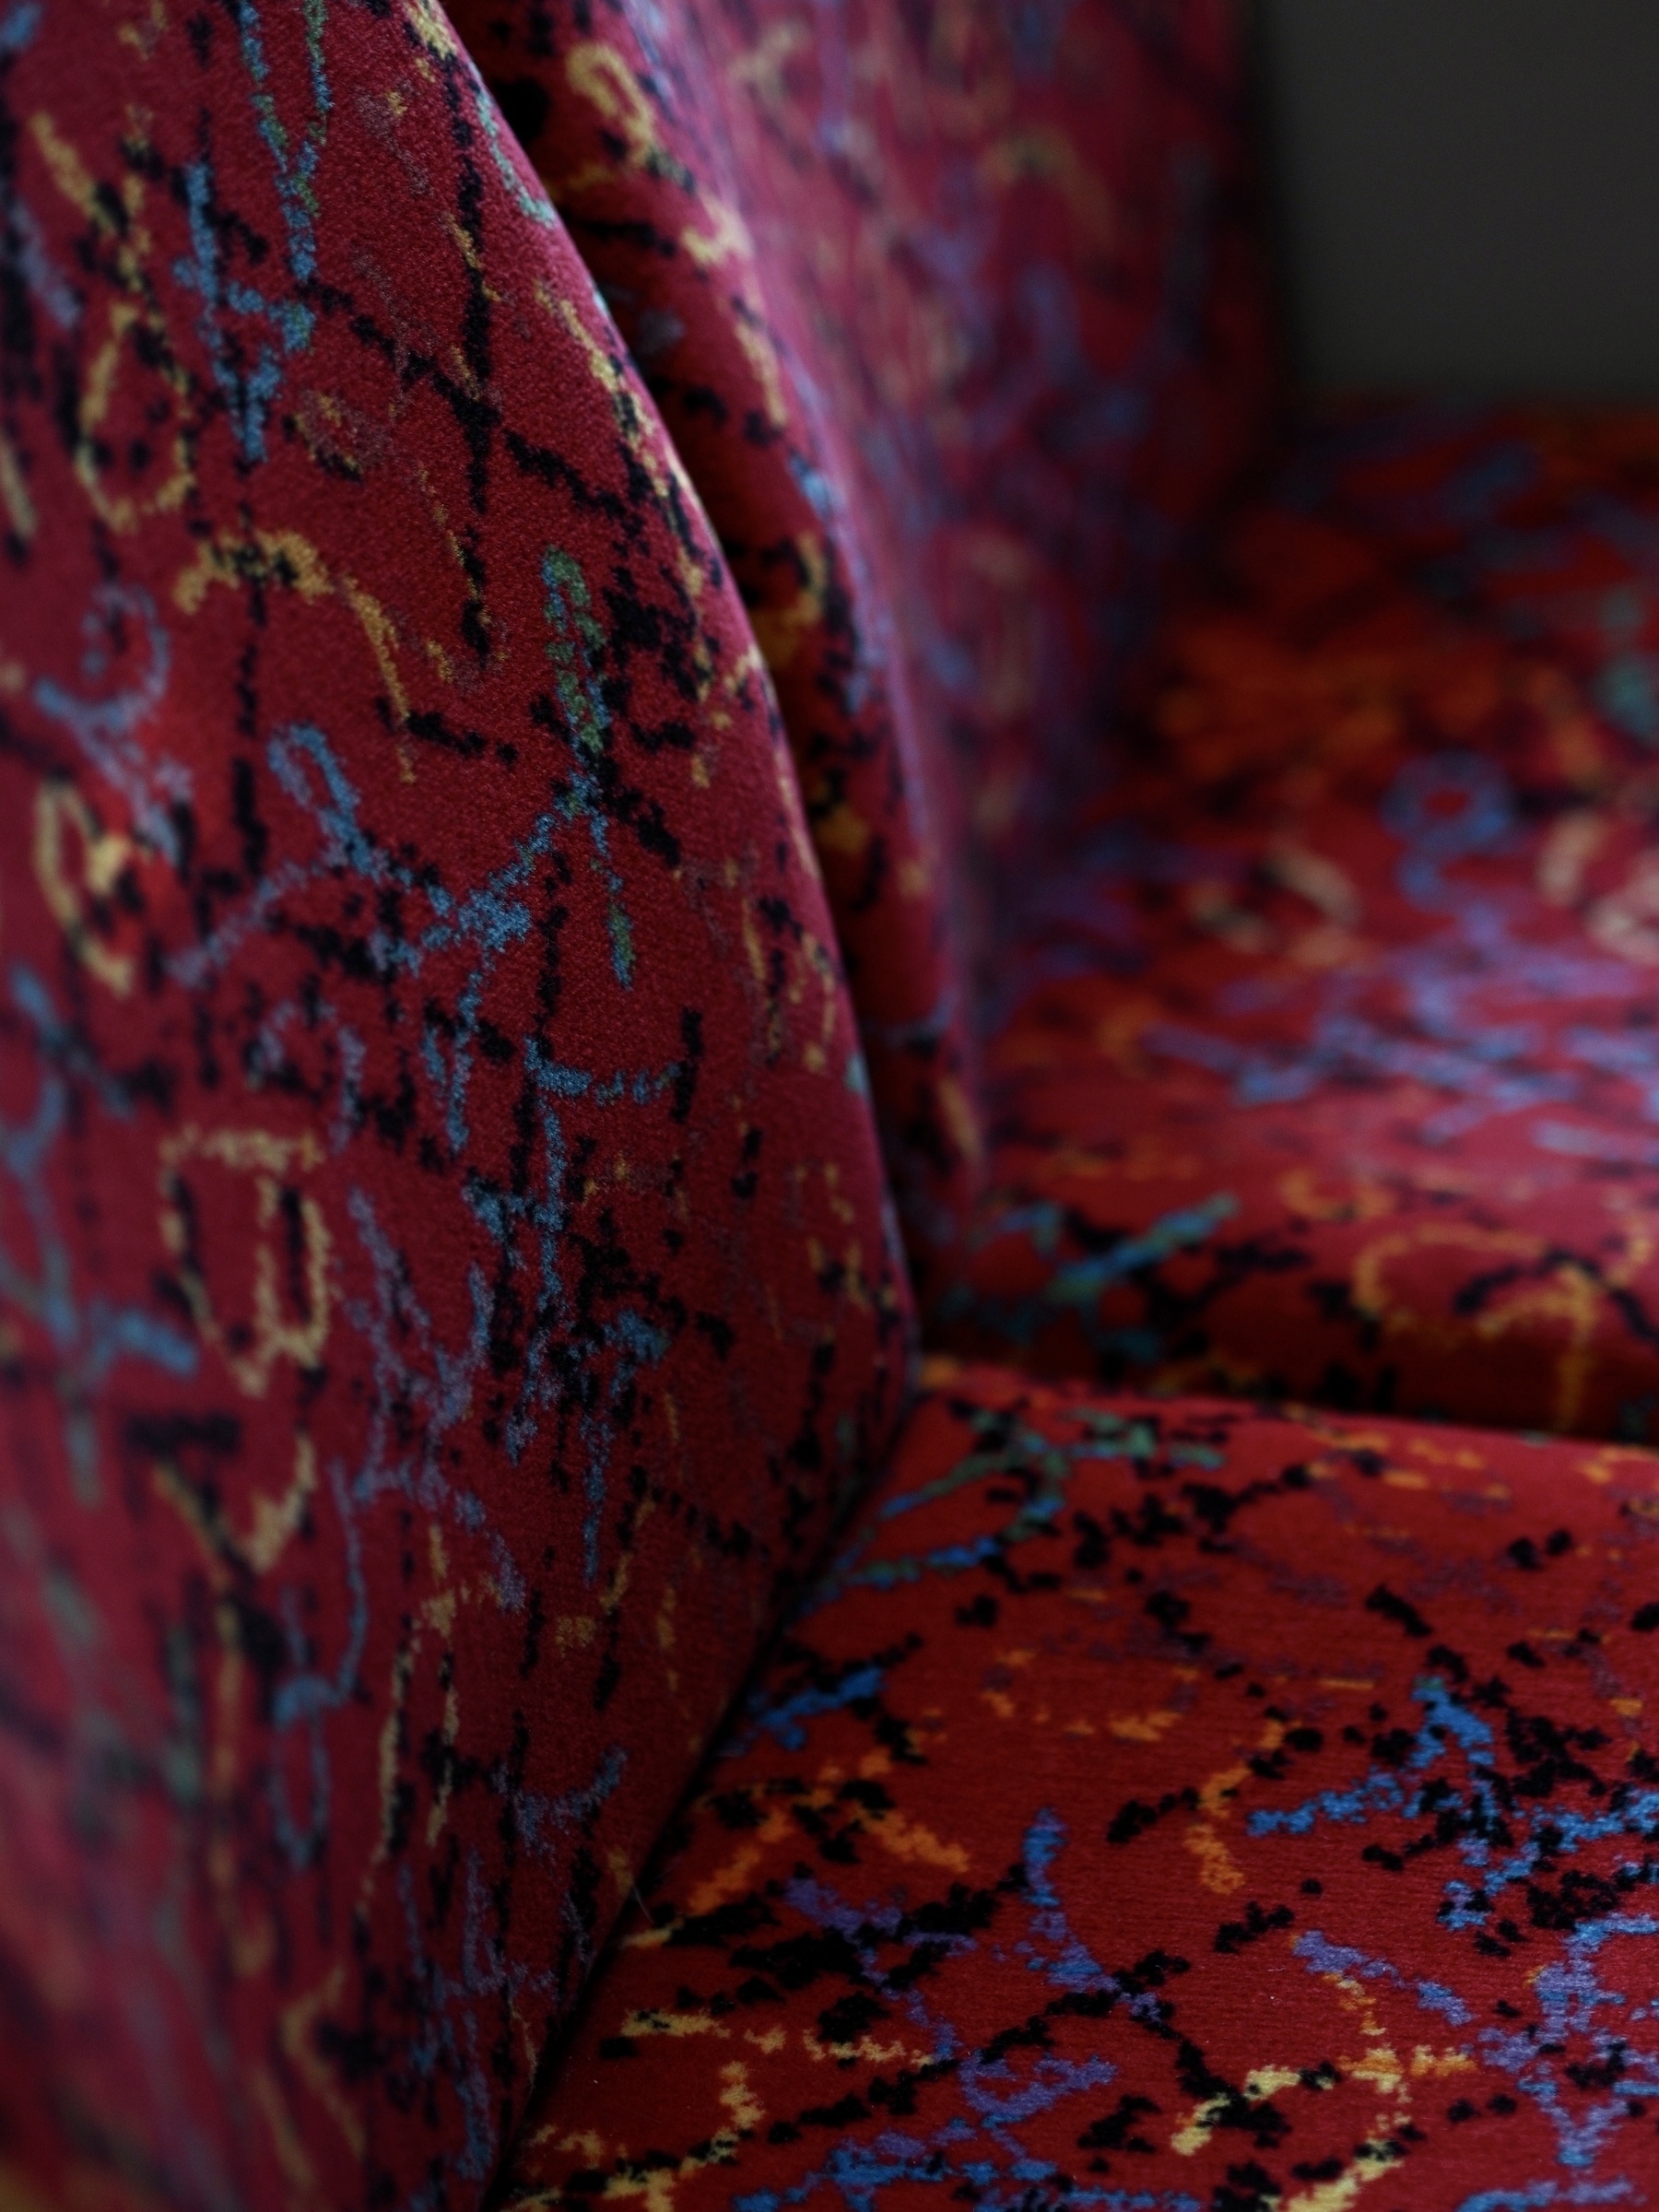 A close-up of tram-seat upholstery